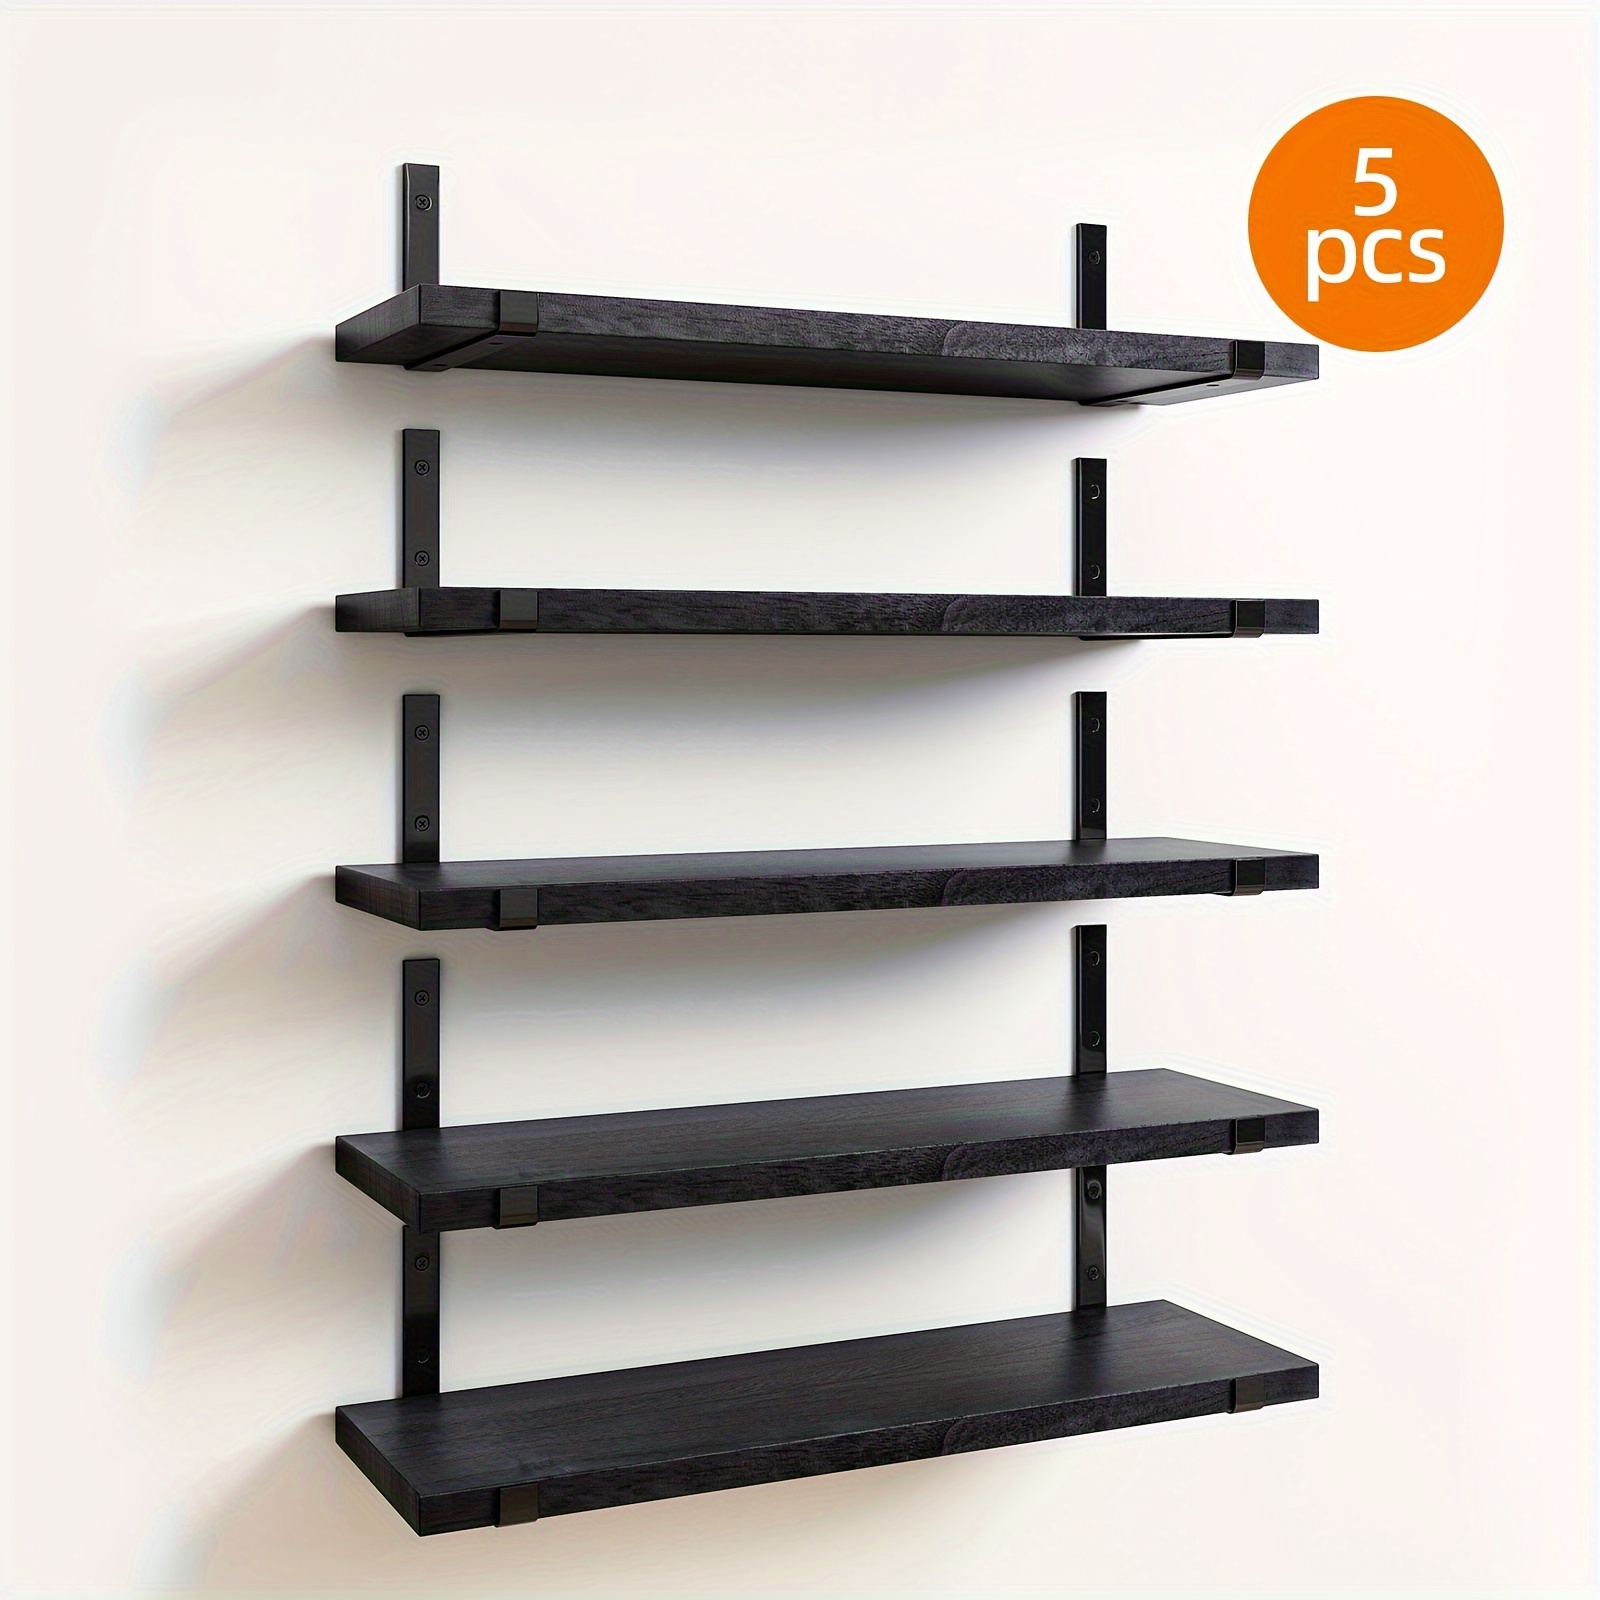 

5 Pcs Black Floating Shelves, Width 4.7 Inches Wall Shelves, Rustic Wood Wall Storage Shelves, For Bedroom, Living Room, Kitchen, Bathroom, Home Decor, Laundry Room, Office And Plants, 15.8*4.7 In